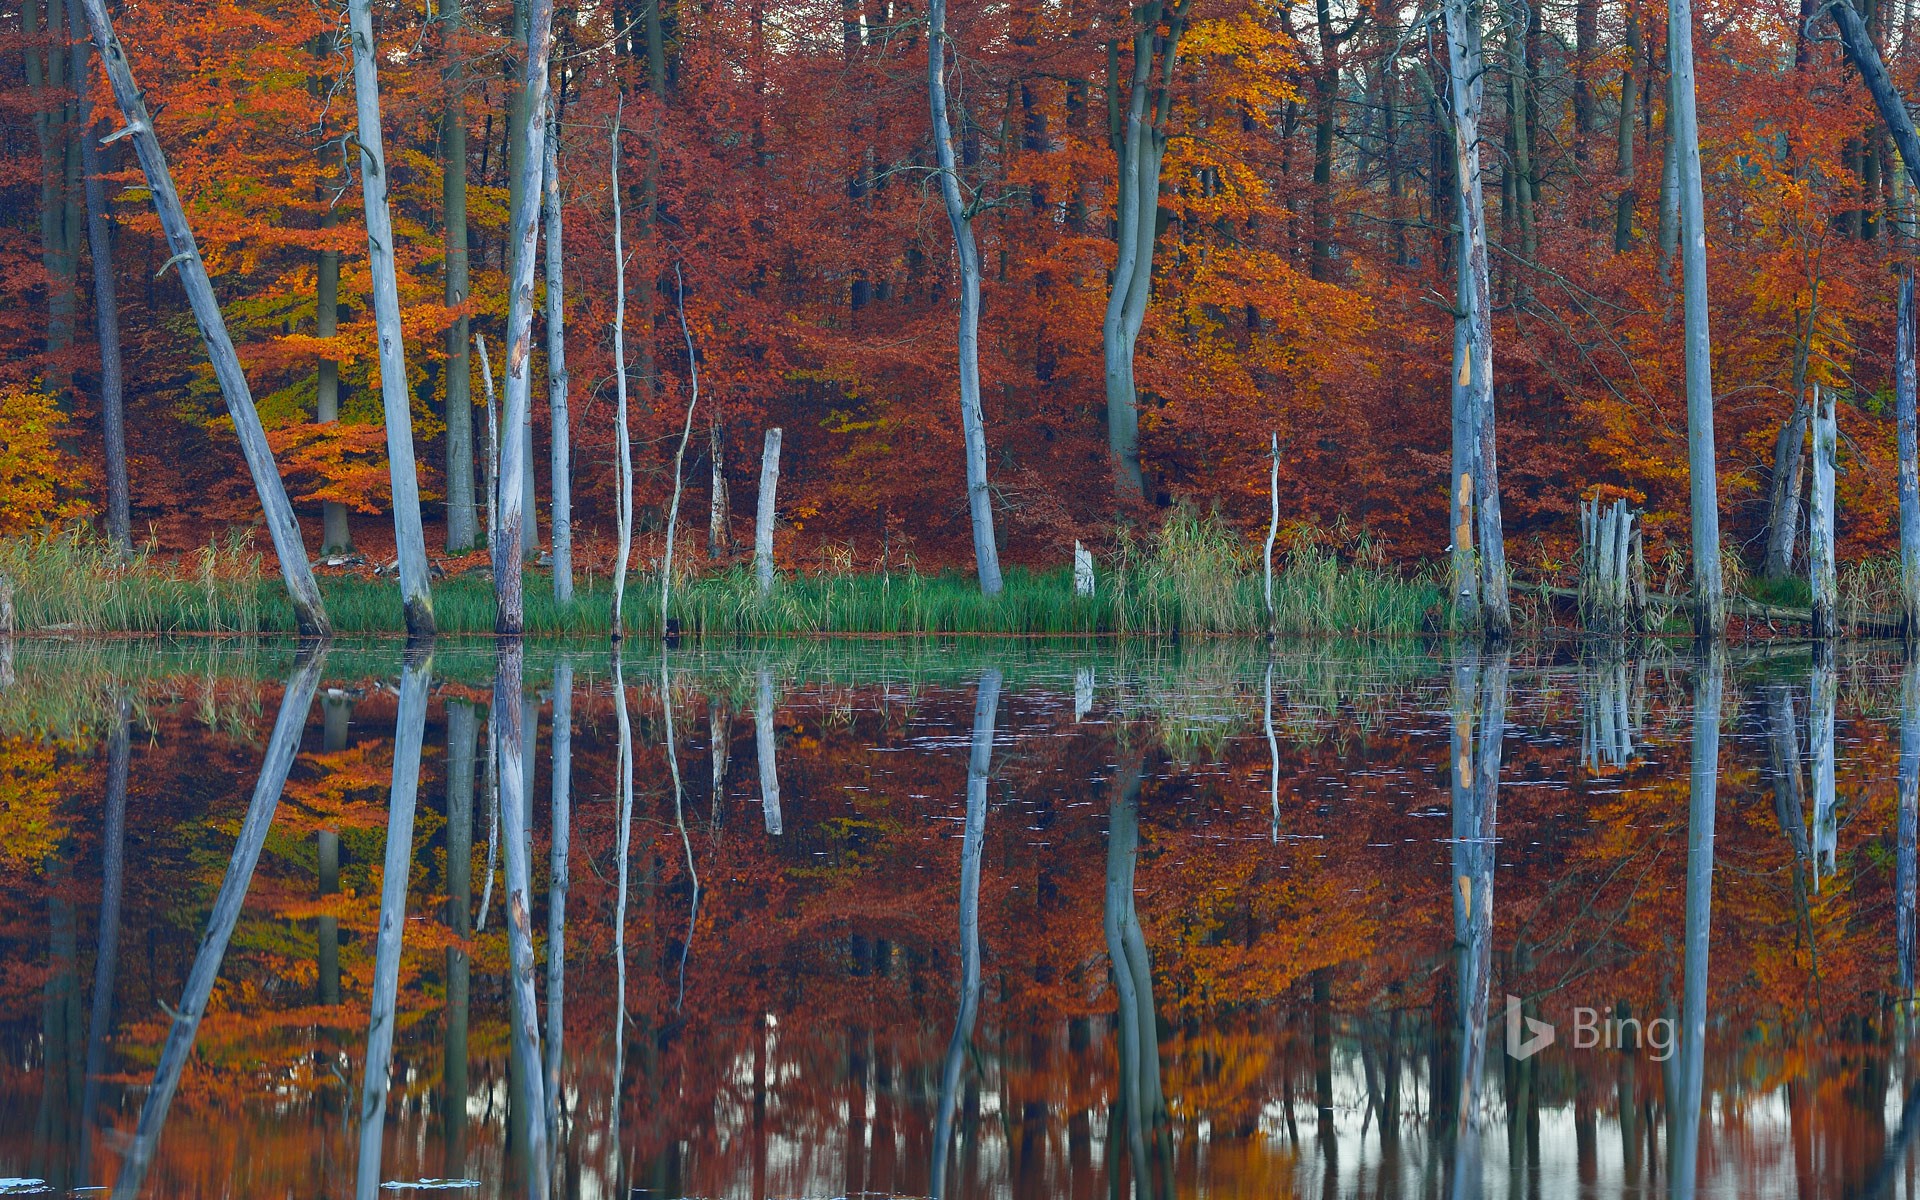 European beech and pine trees are reflected in the Schweingartensee near Carpin, Mecklenburg-Western Pomerania